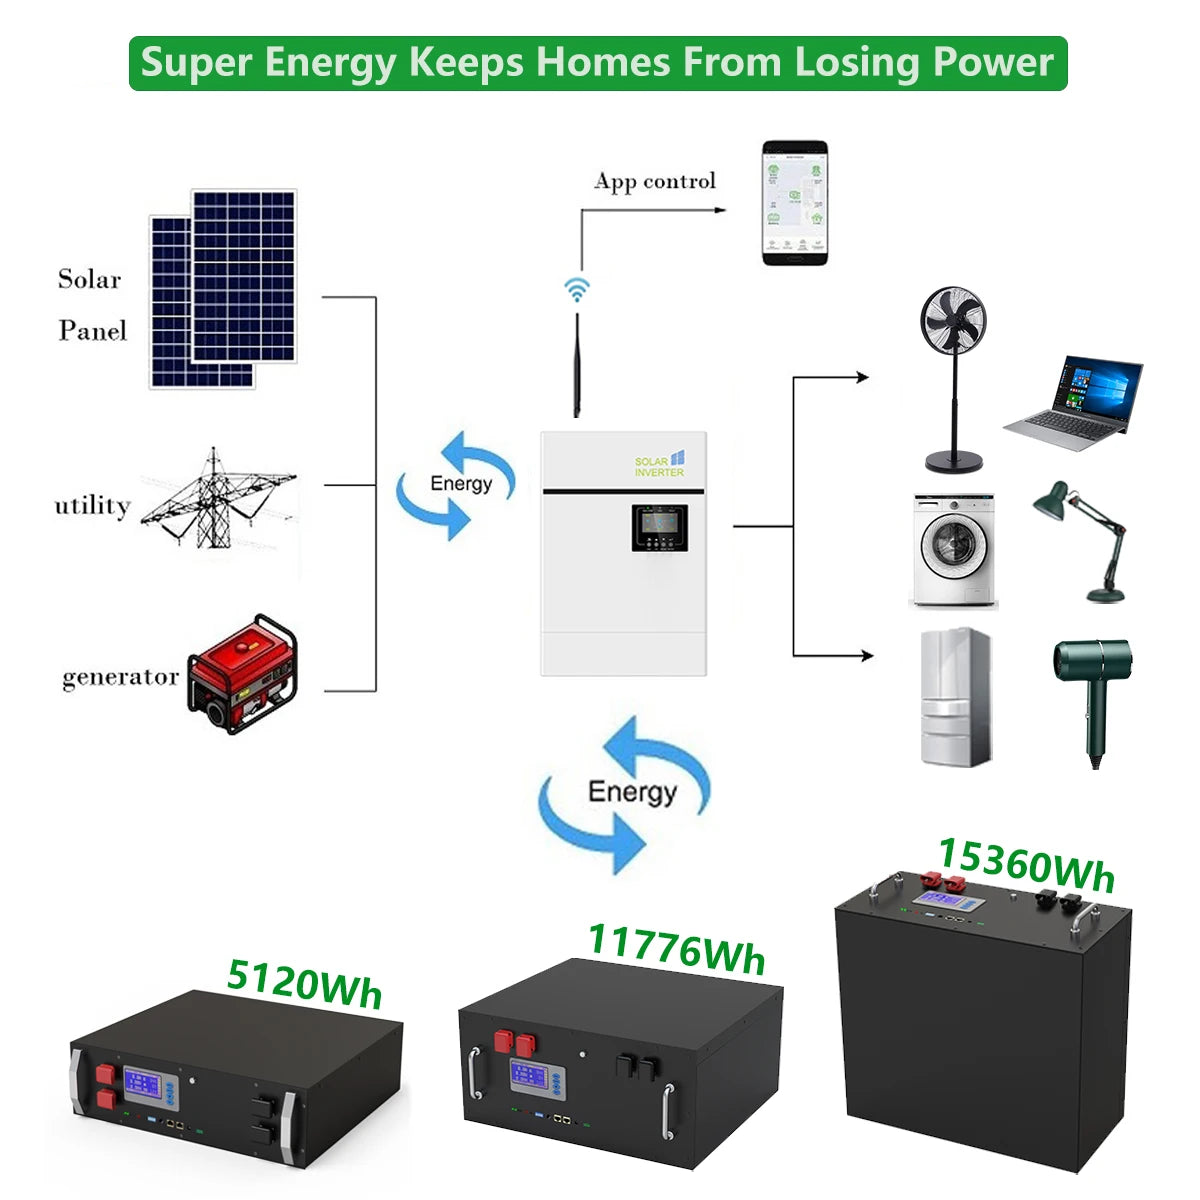 48V 100Ah 200Ah LiFePO4 Battery, Renewable energy storage system providing 15.36 kWh of power, including 11.776 kWh continuous and 5.12 kWh surge capacity.